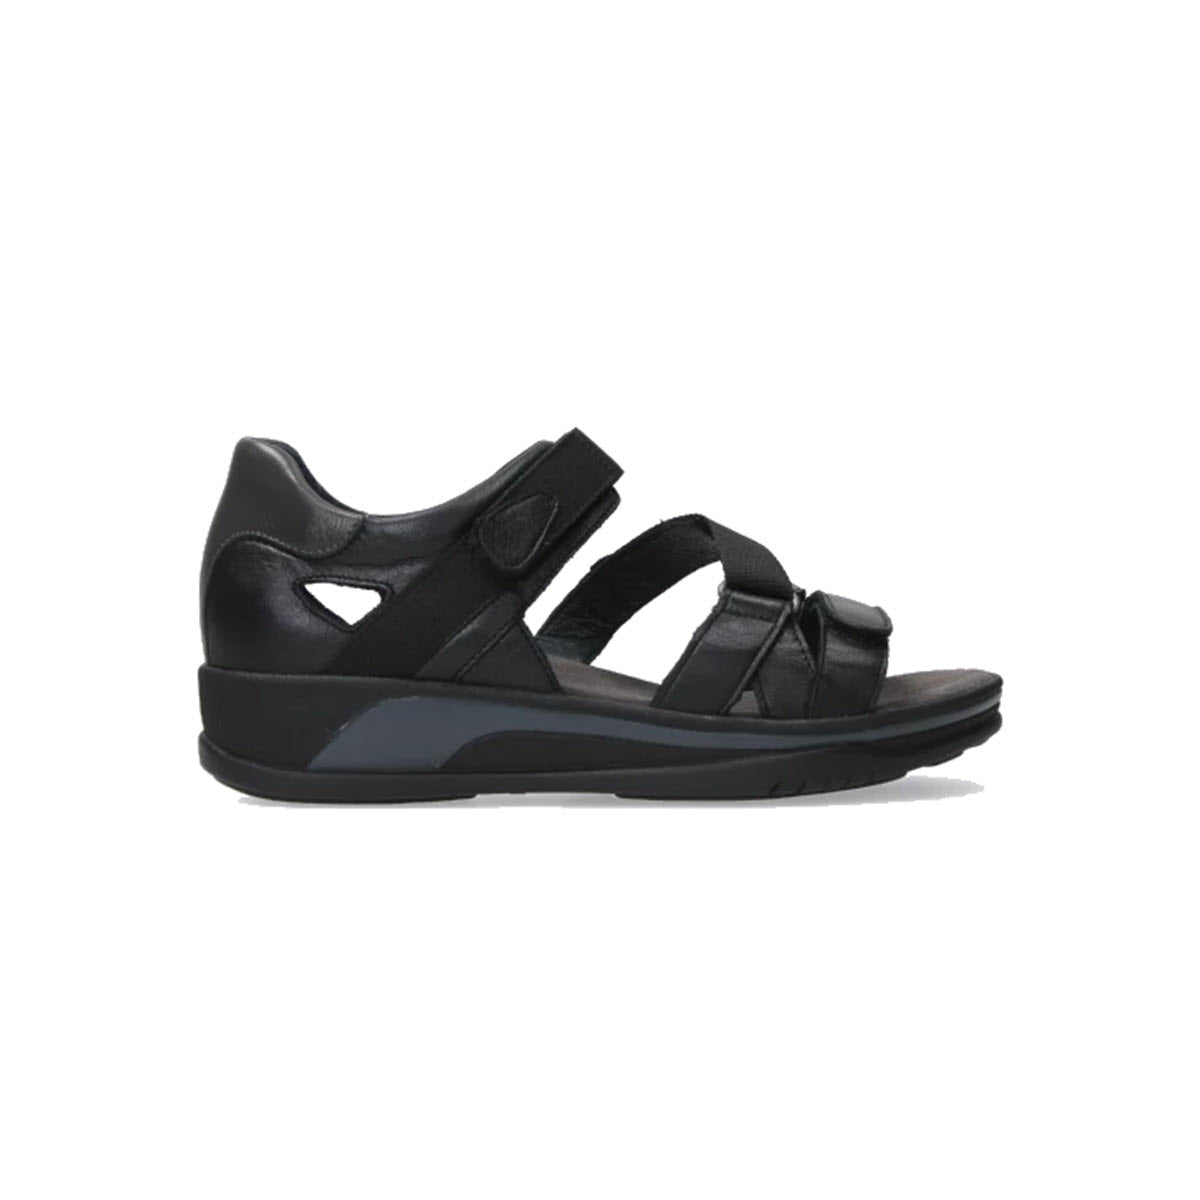 A black orthopedic trekking sandal with supportive straps and a cut-out design, displayed on a white background. 
Product Name: Wolky Desh Black - Womens
Brand Name: Wolky